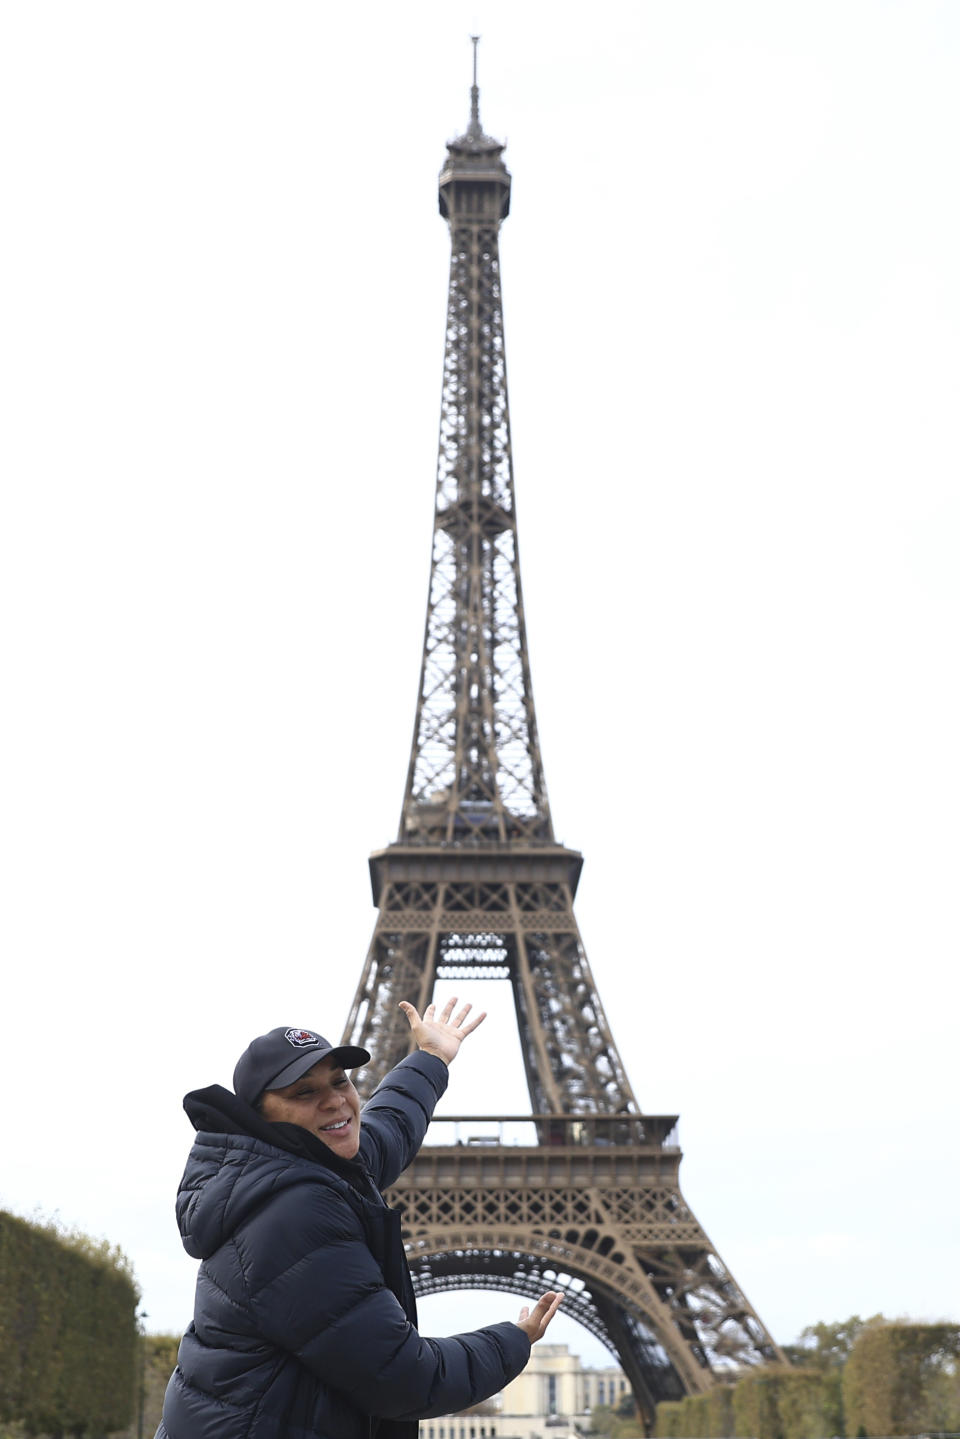 South Carolina college basketball head coach Dawn Staley poses in front of the Eiffel Tower, Thursday Nov. 2, 2023 in Paris. Notre Dame will face South Carolina in a NCAA college basketball game Monday Nov. 6 in Paris. (AP Photo/Aurelien Morissard)